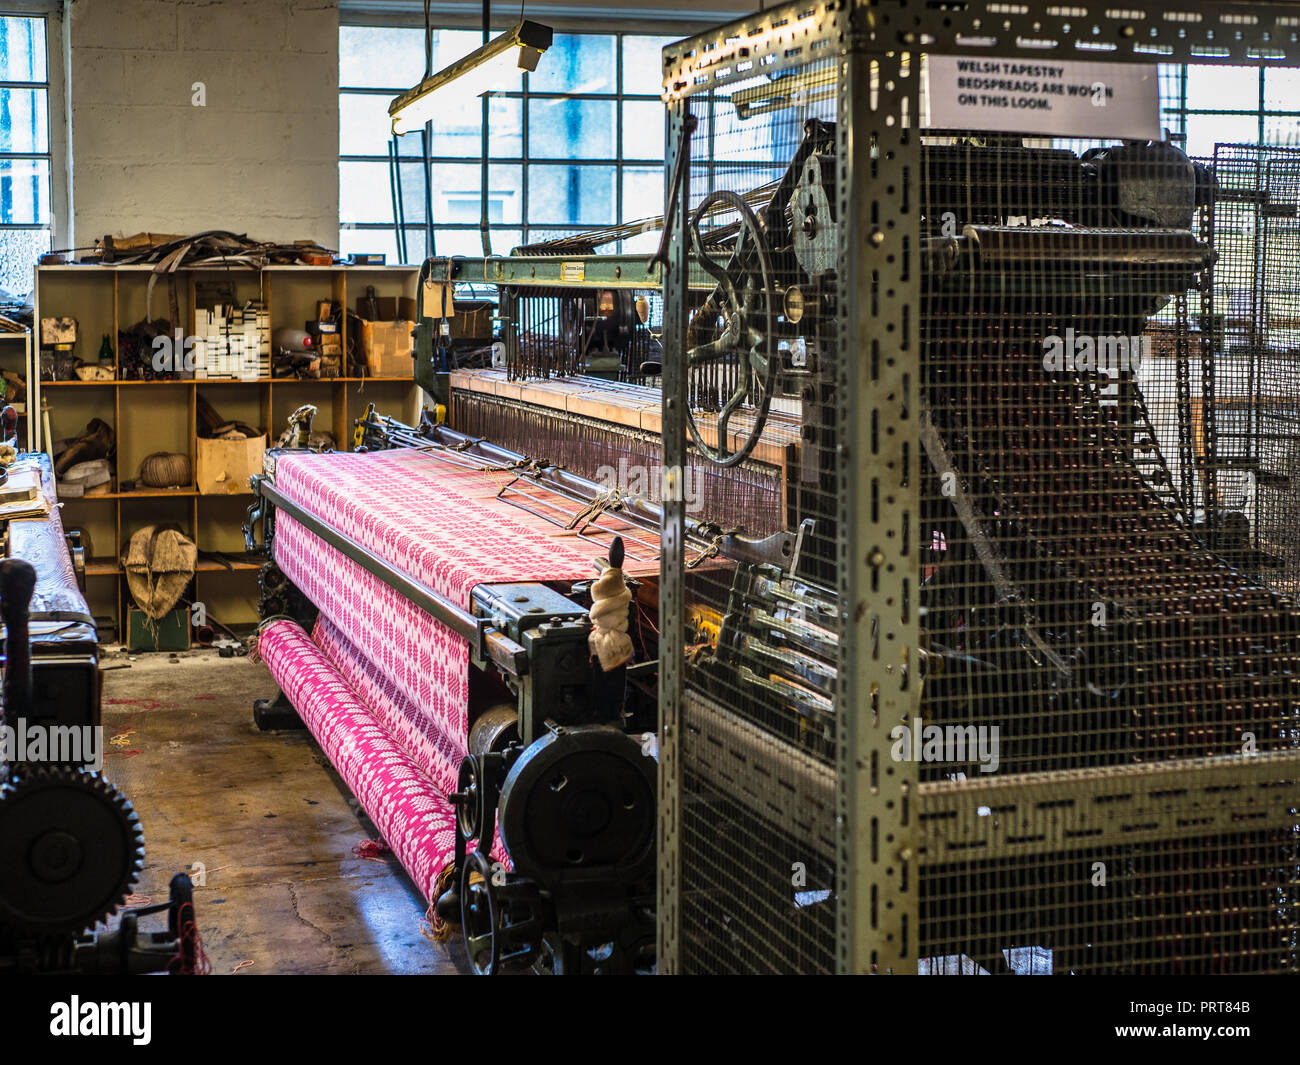 Trefriw Woollen Mills in N.Wales, one of the last remaining woollen mills still in production in Wales. Known for traditional double-weave blankets. Stock Photo